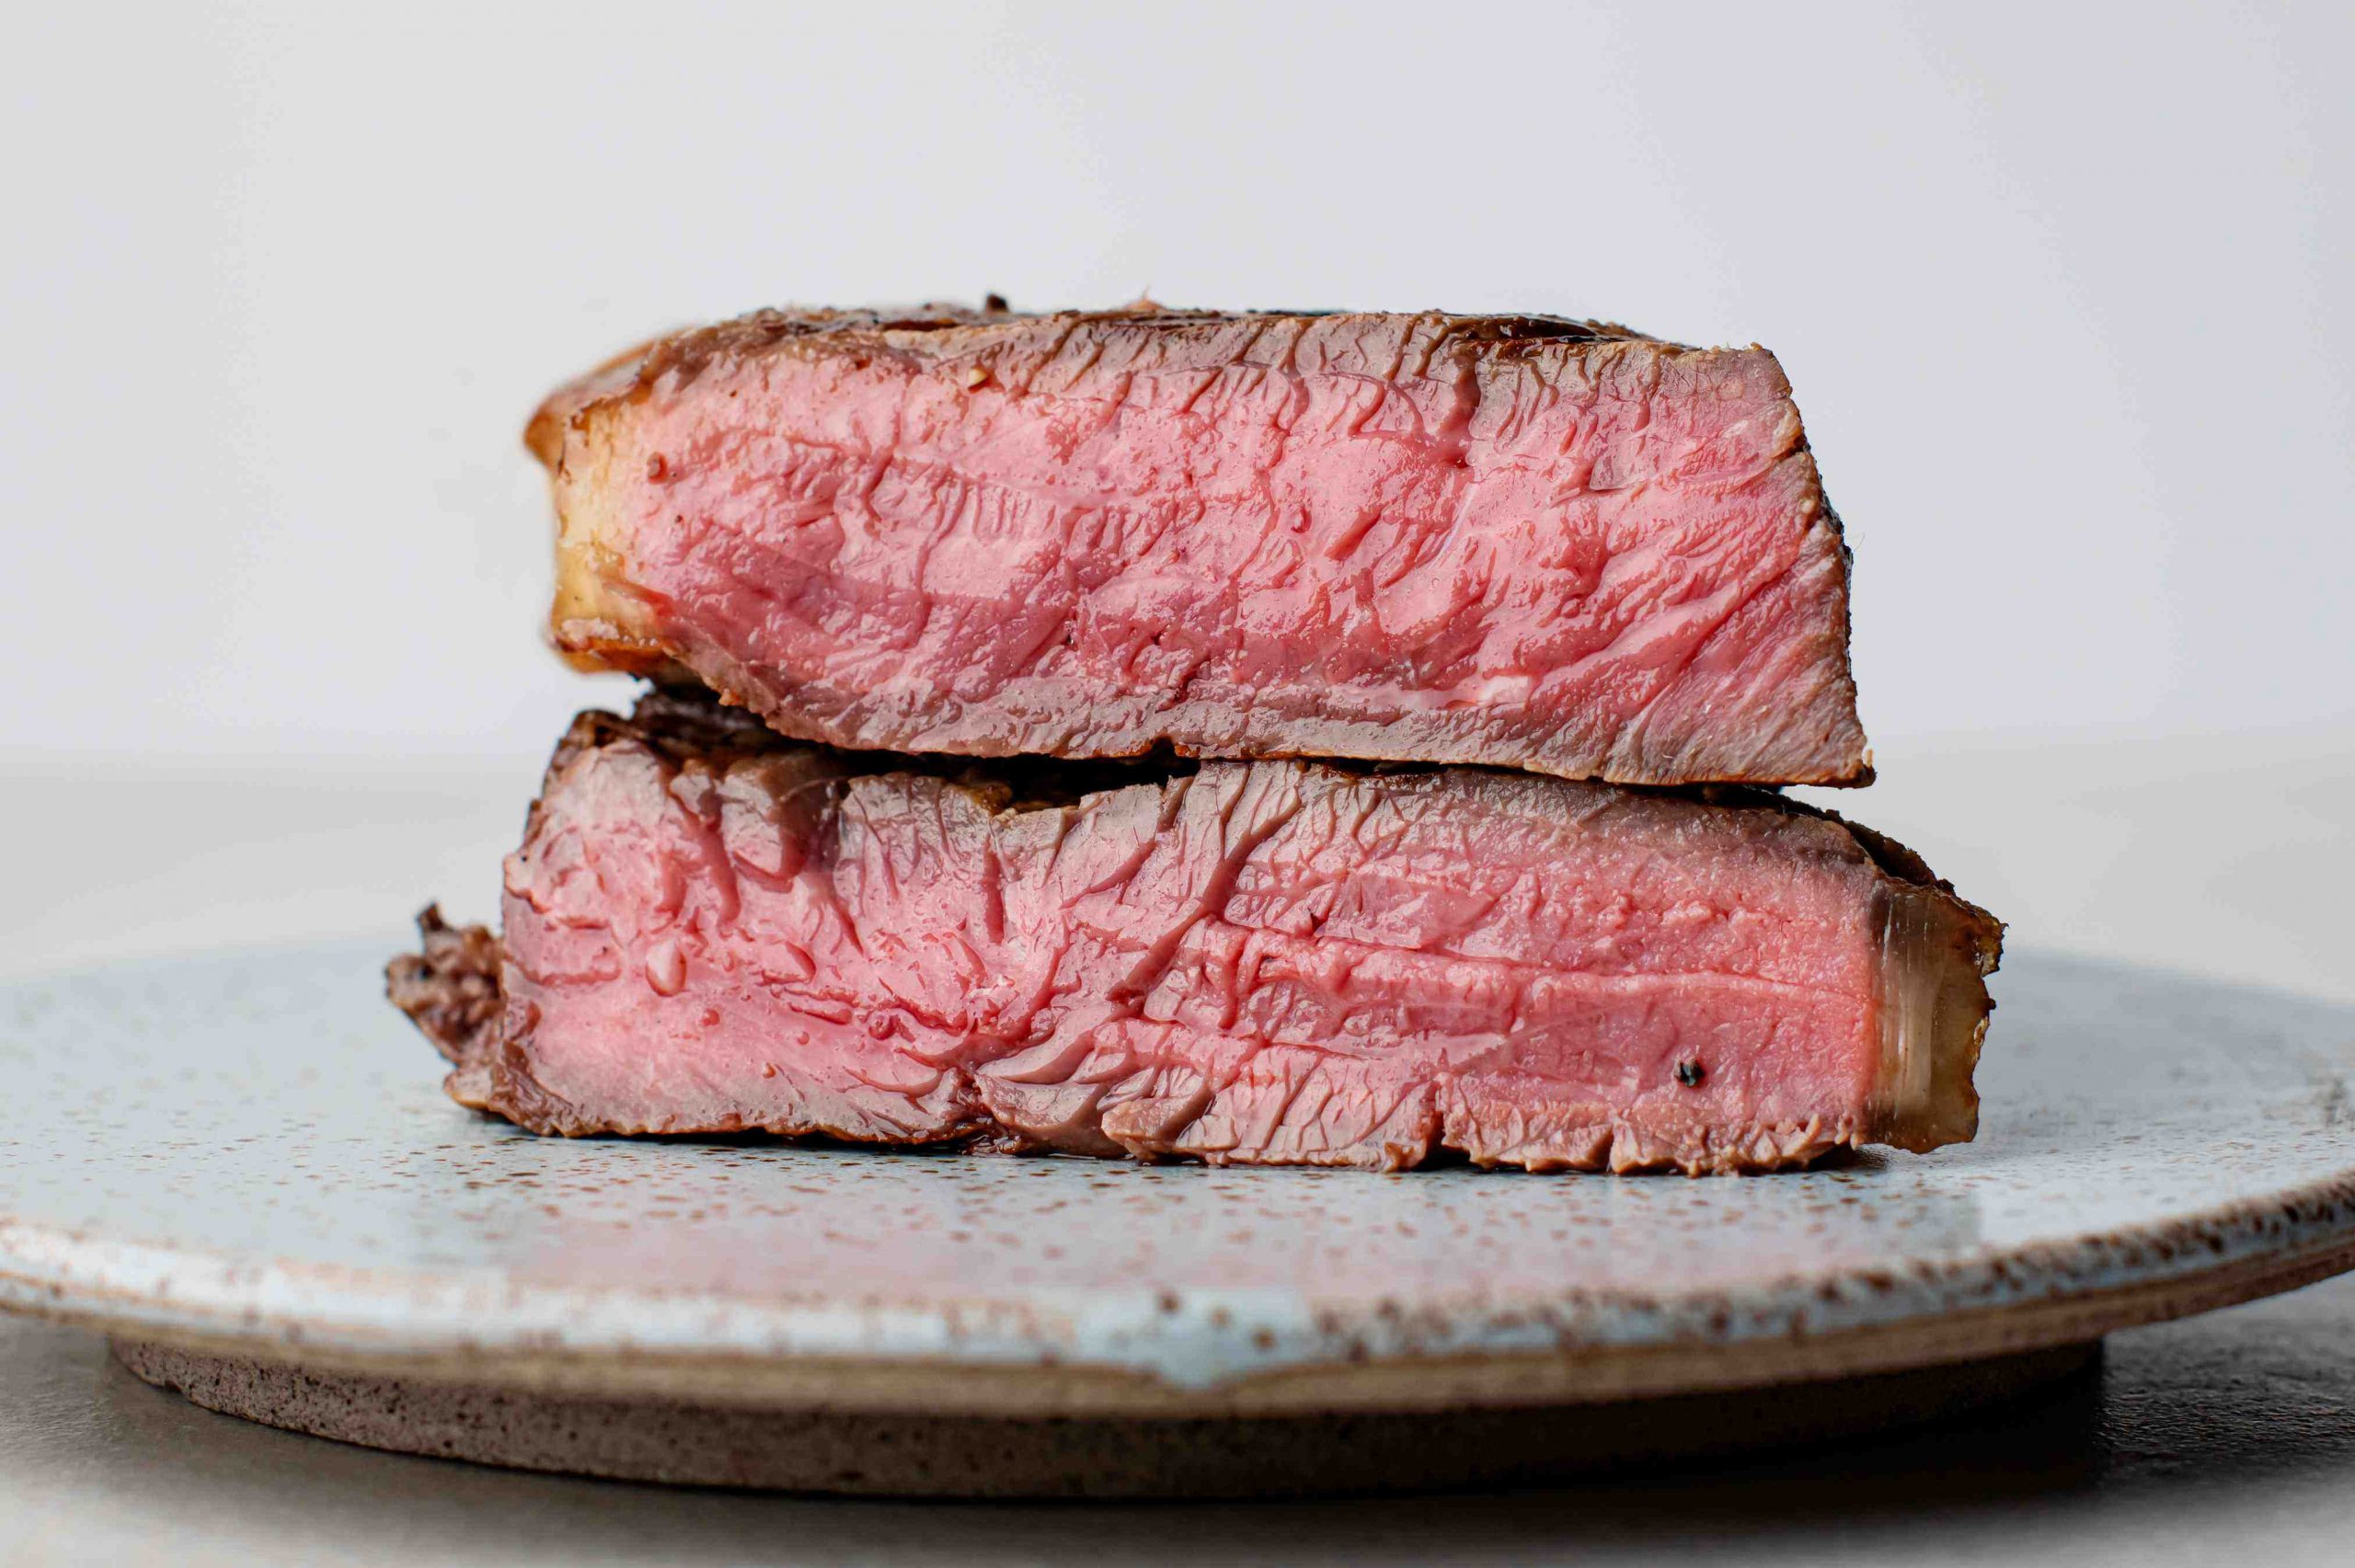 What's the rarest you can eat steak?